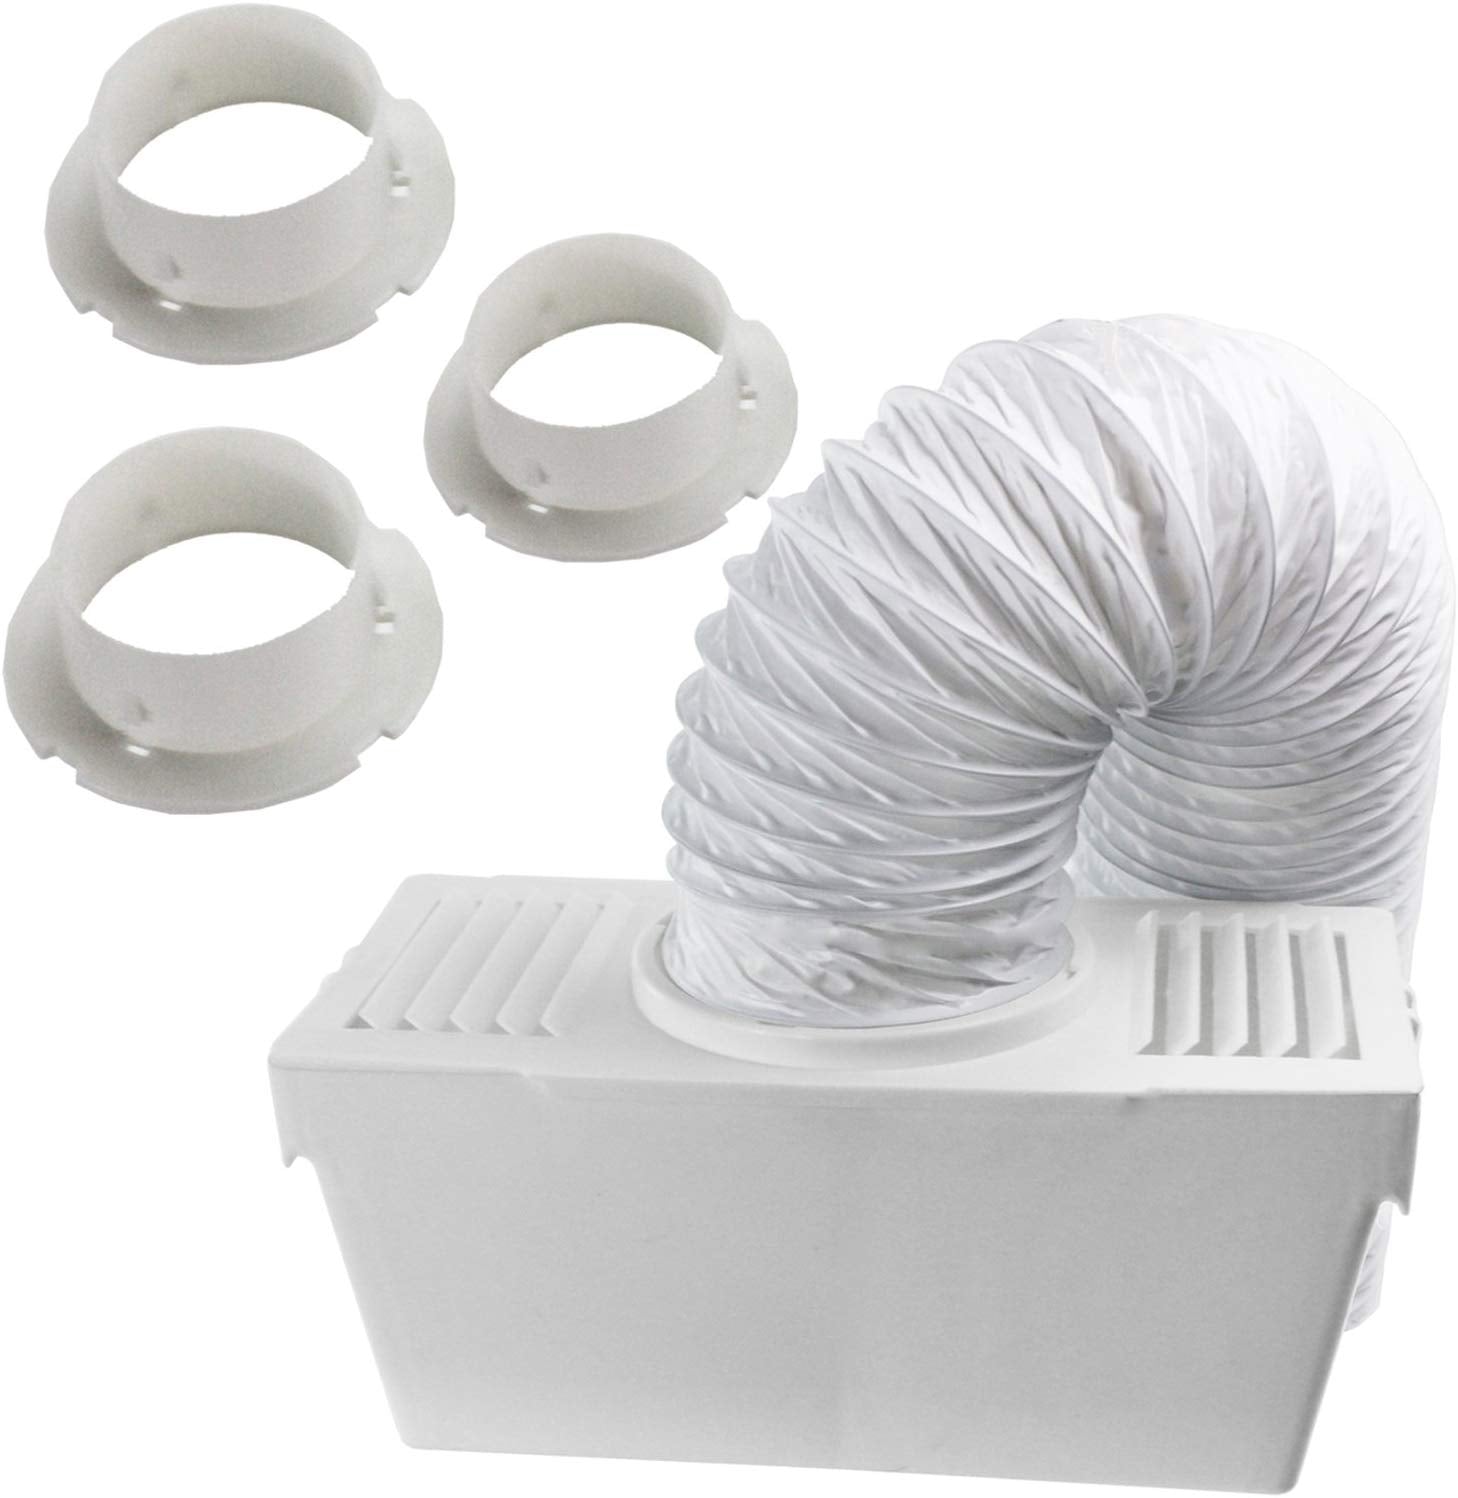 Vent Hose Condenser Kit with 3 x Adapters for Bauknecht Tumble Dryer (1.2m)